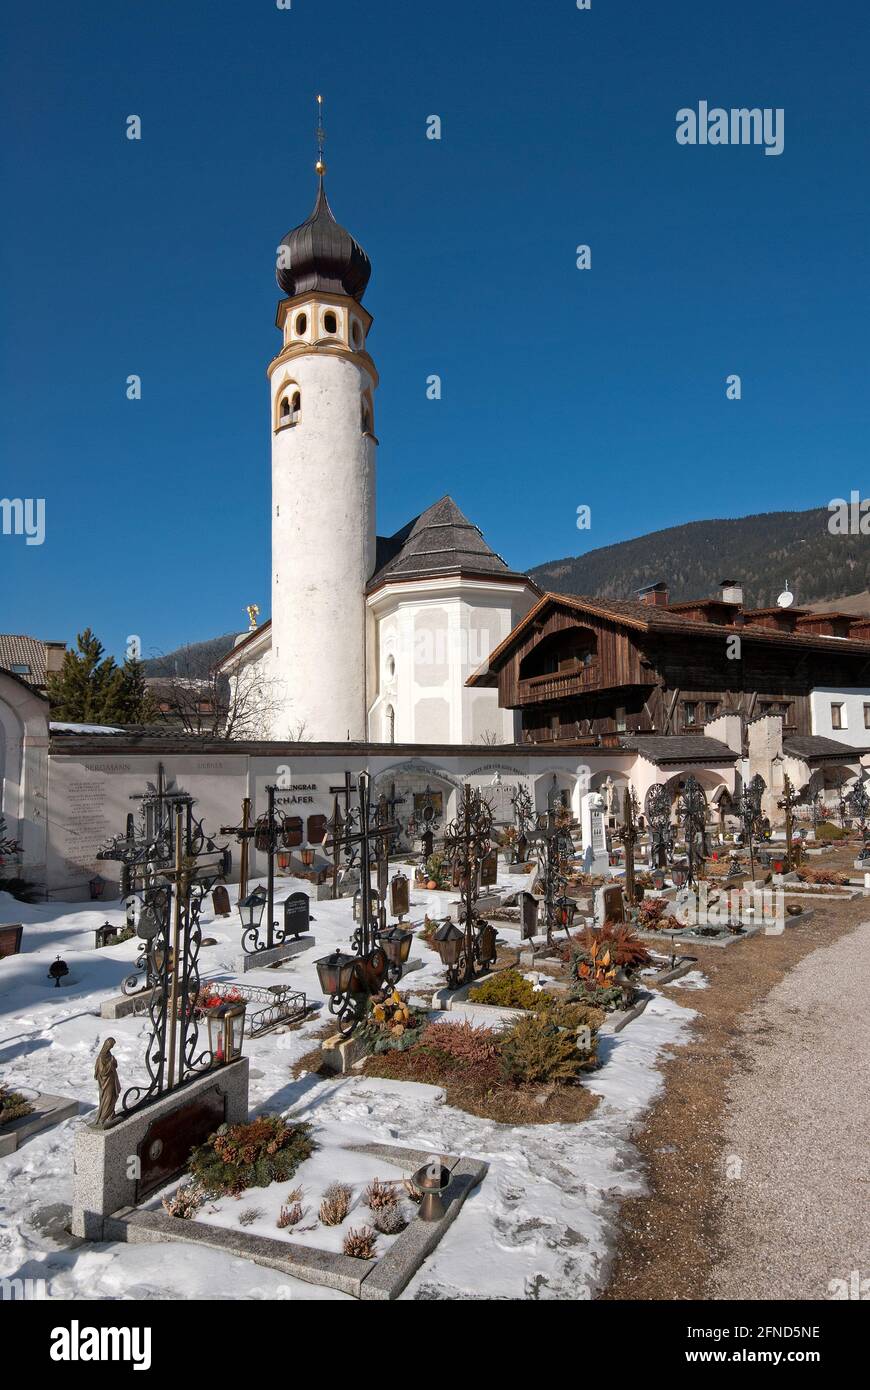 Cemetery and San Michael parish church with cylindrical bell tower in San Candido (Innichen), Pusteria Valley, Trentino-Alto Adige, Italy Stock Photo